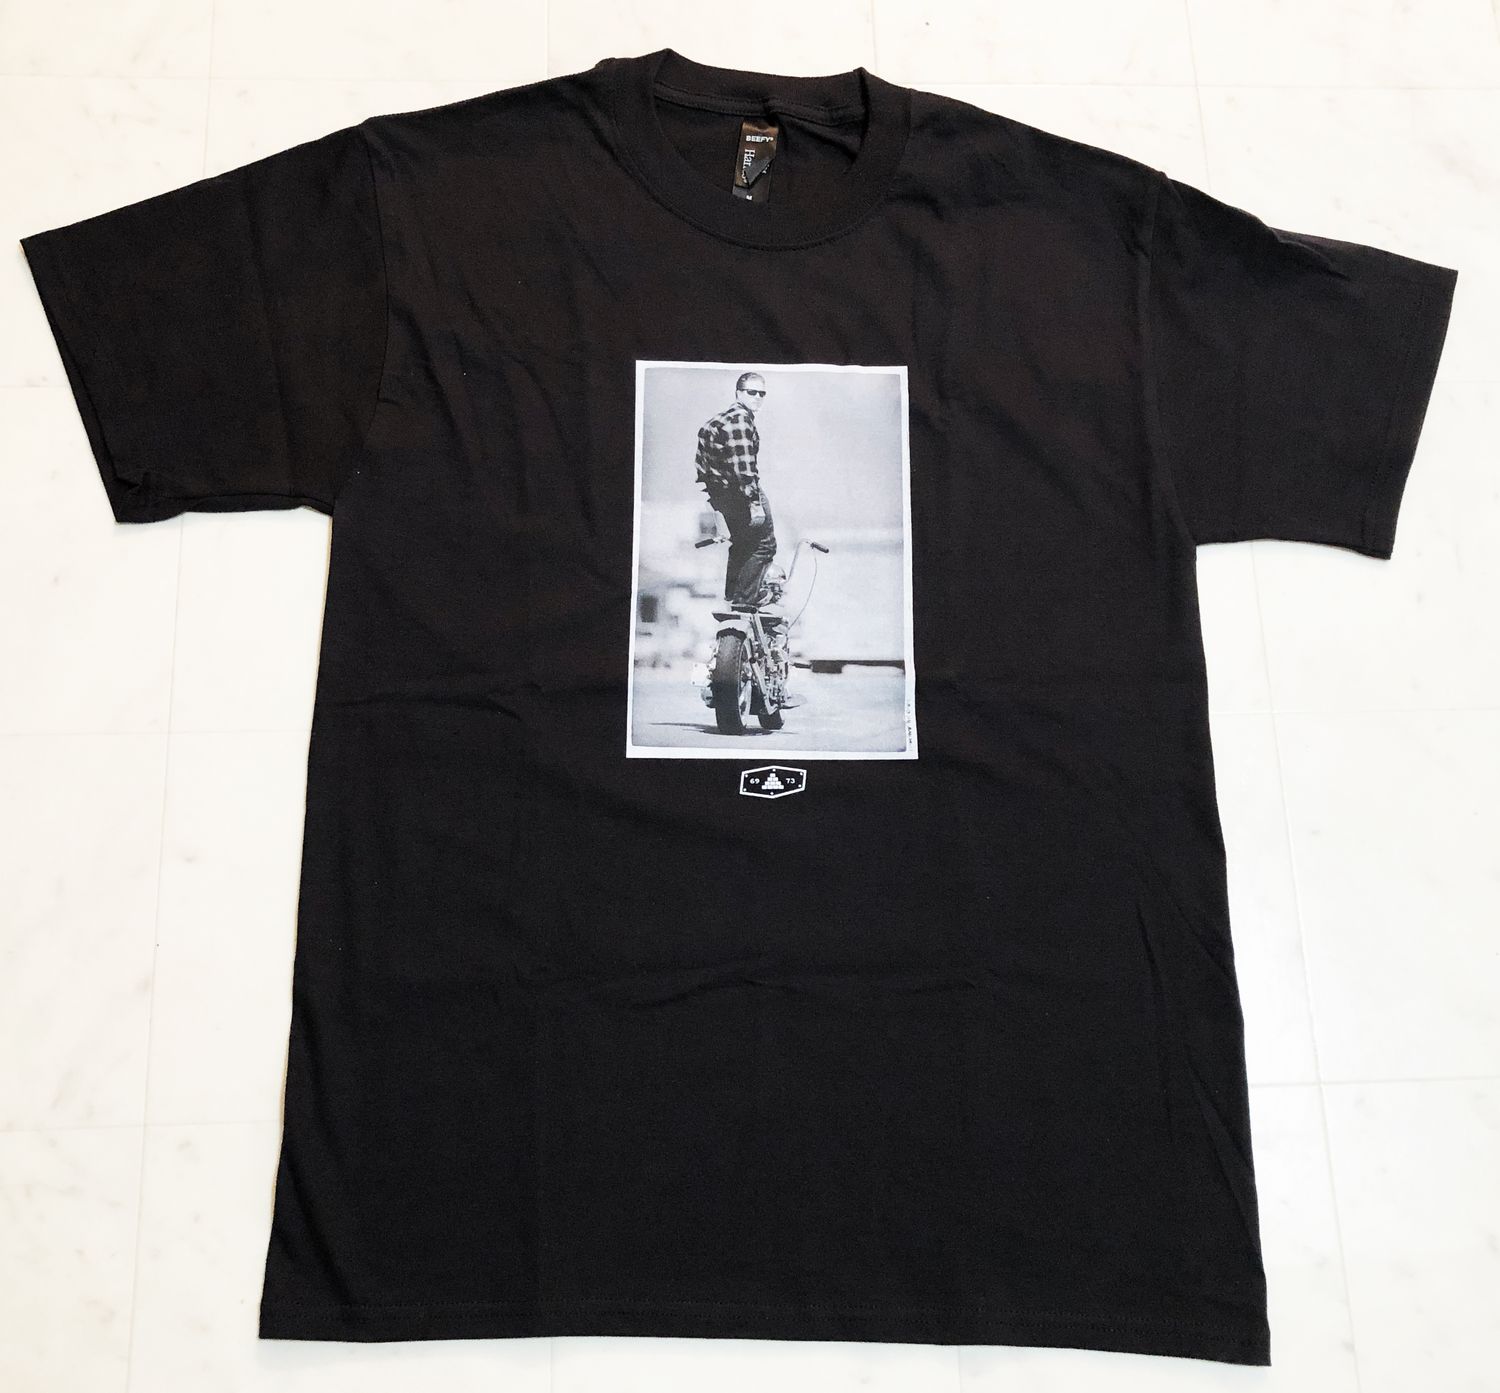 BRICKS BRAND -JJ MOTORCYCLE STAND BY STURT- S/S tee color:[black] size:[M]